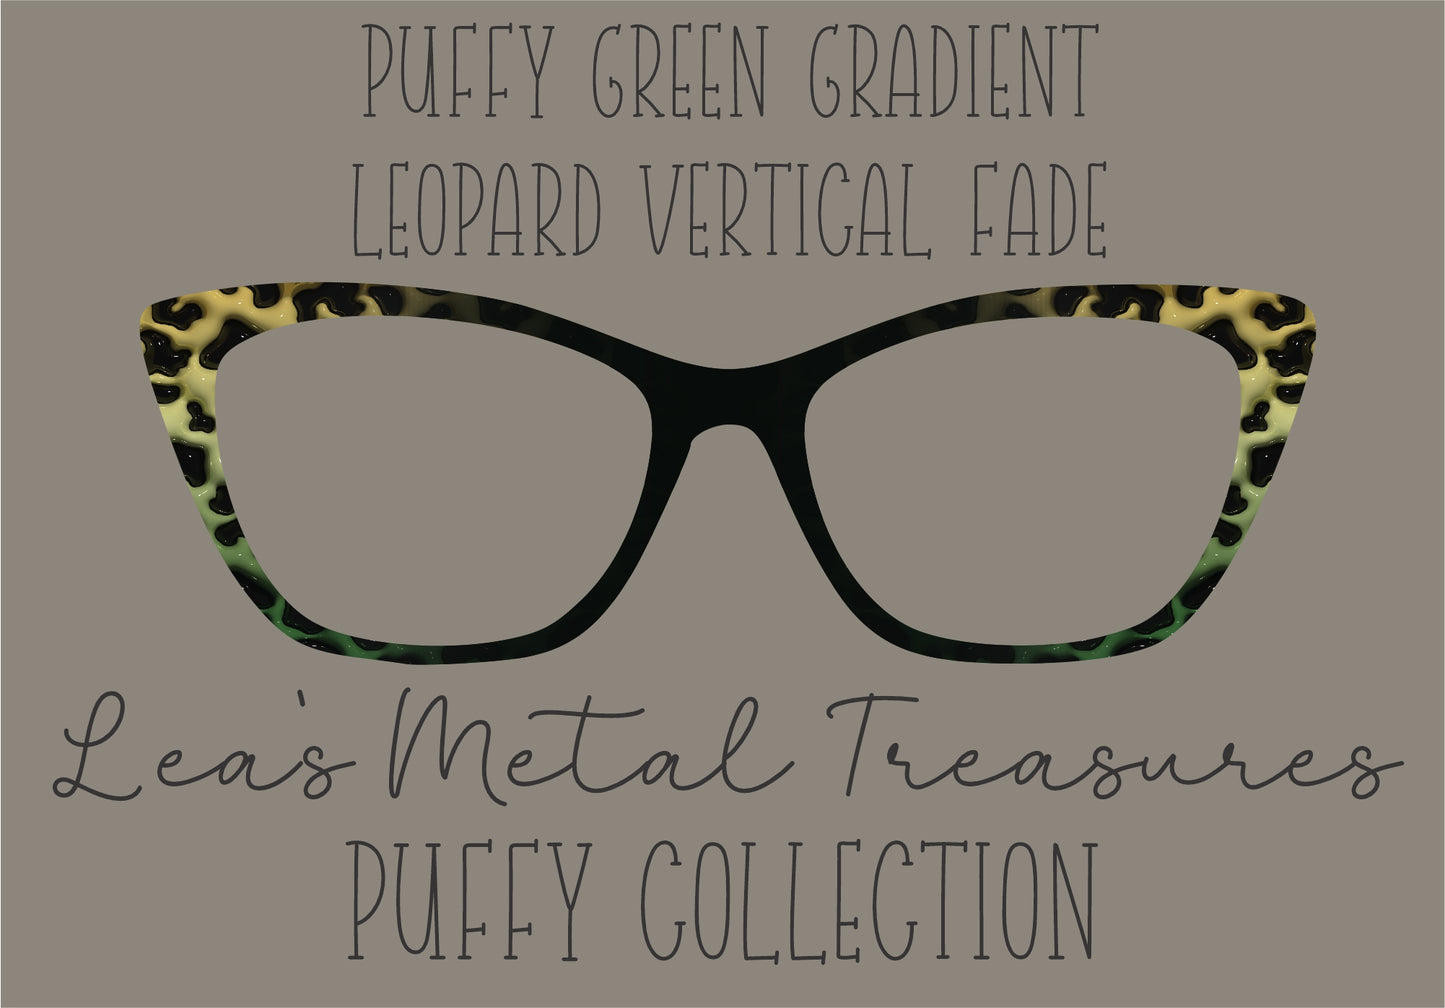 PUFFY GREEN GRADIENT LEOPARD VERTICAL FADE Eyewear Frame Toppers COMES WITH MAGNETS